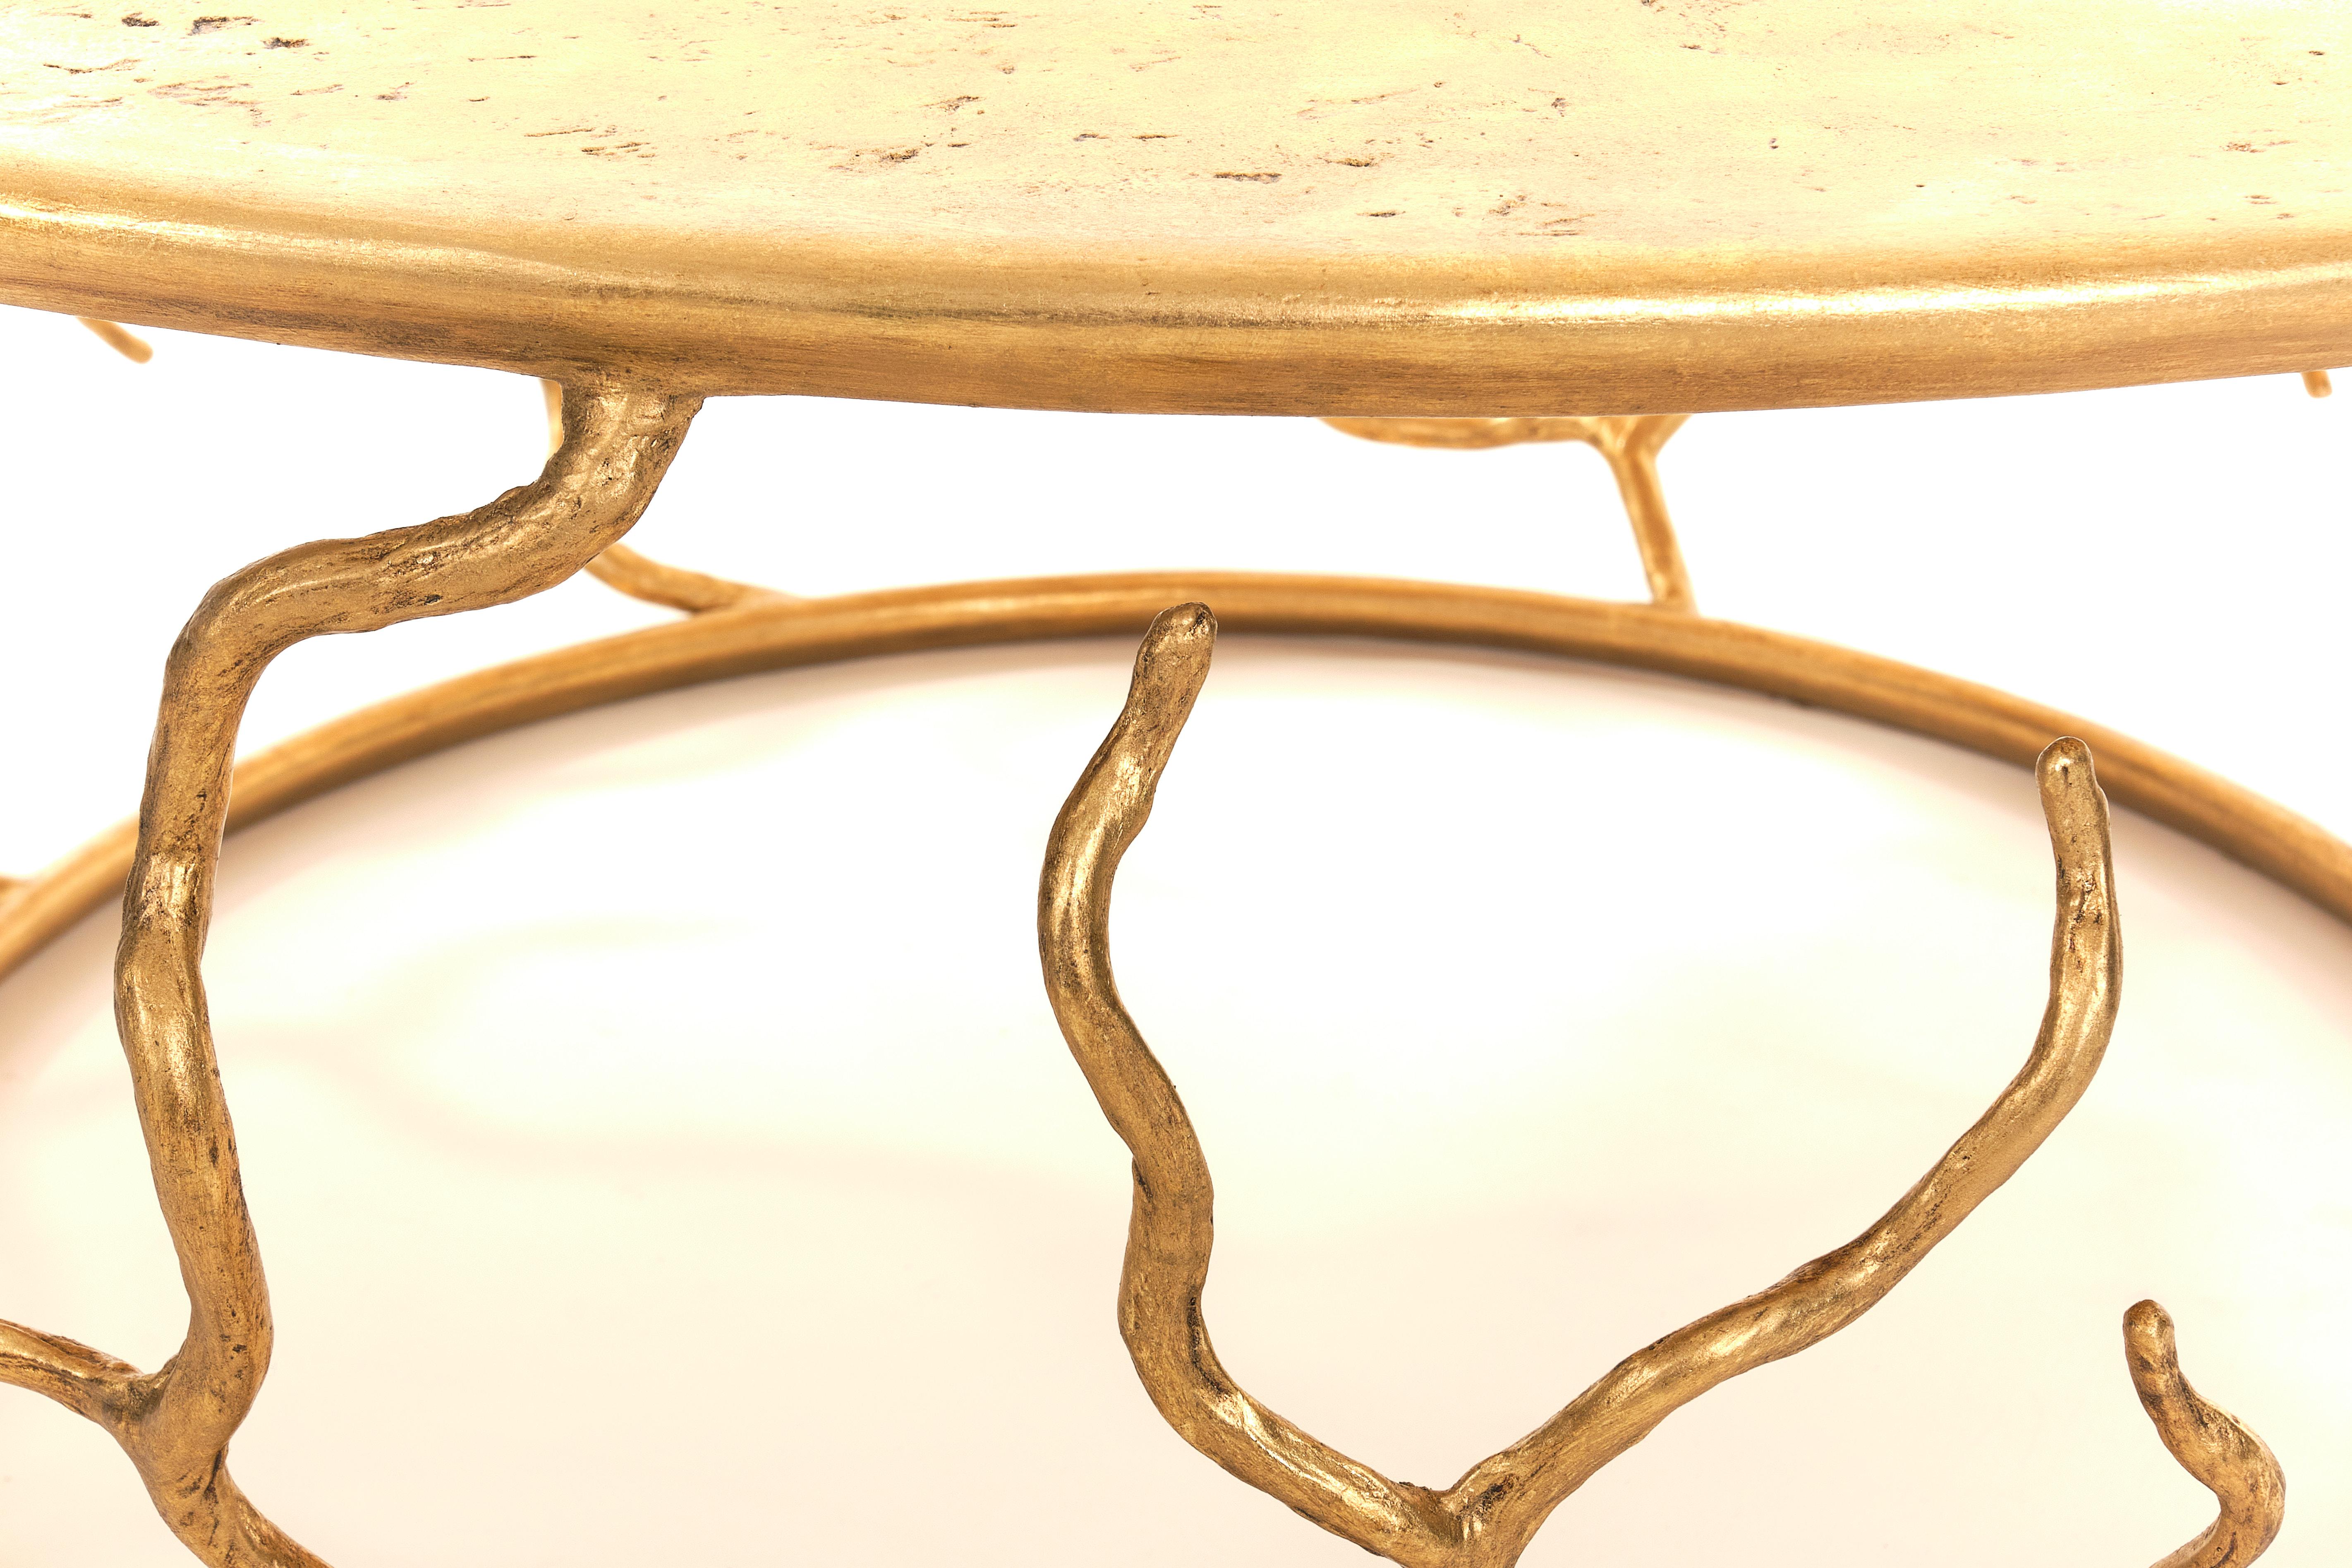 Organic forms and natural motifs. The Etna coffee table is individually hammered and hand formed. Each piece has been skillfully finished to resemble the texture of tree bark. The Top is hand-sculpted. Available also in Forest Brown Finish.